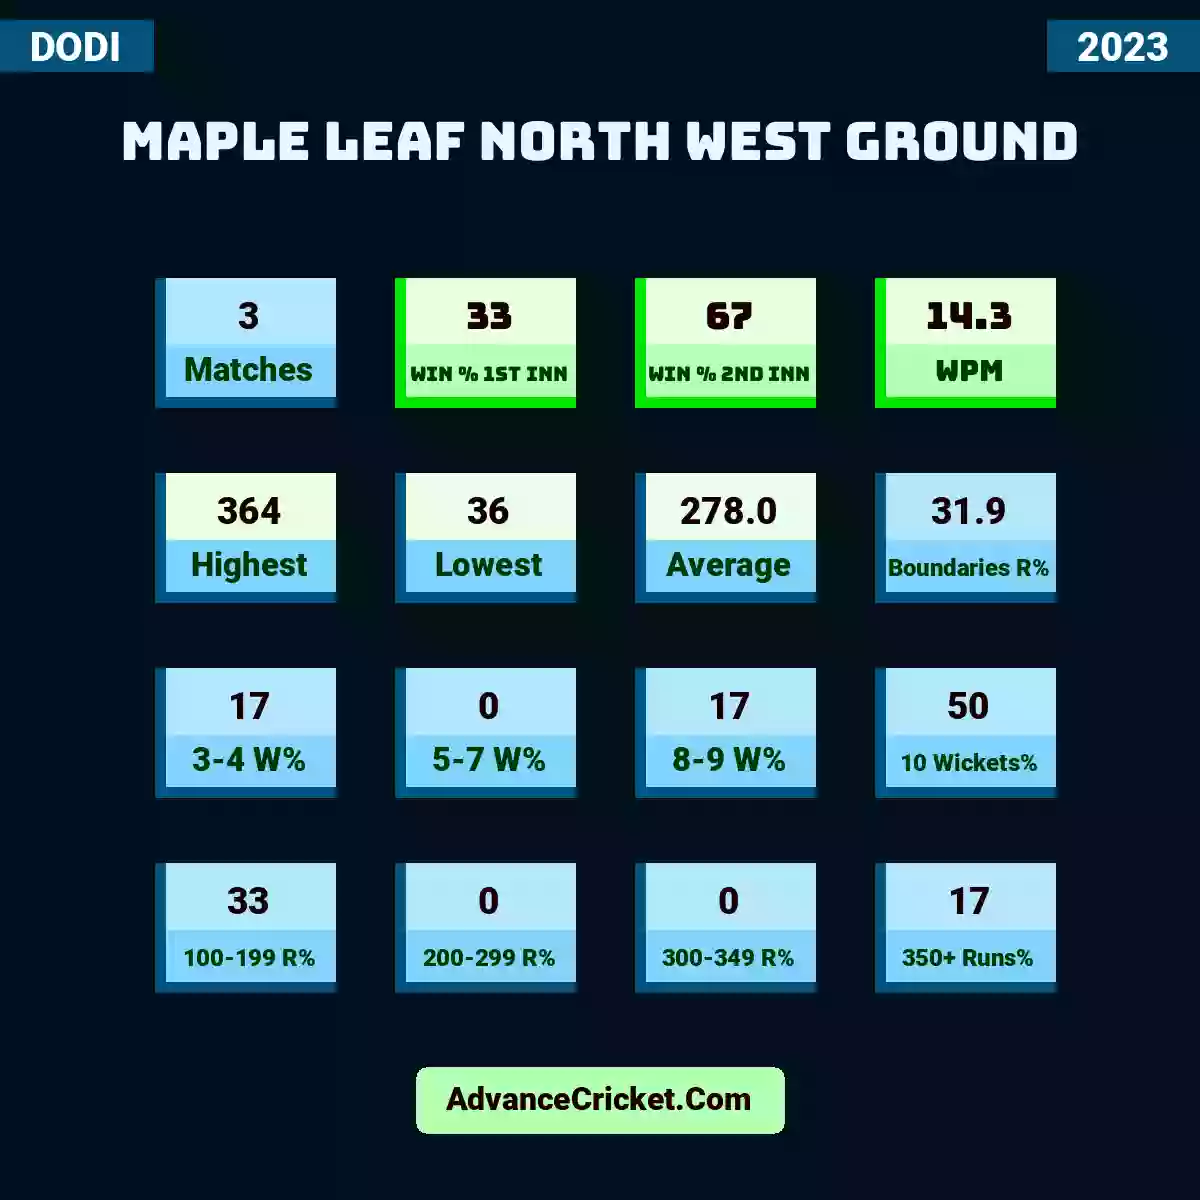 Image showing Maple Leaf North West Ground with Matches: 3, Win % 1st Inn: 33, Win % 2nd Inn: 67, WPM: 14.3, Highest: 364, Lowest: 36, Average: 278.0, Boundaries R%: 31.9, 3-4 W%: 17, 5-7 W%: 0, 8-9 W%: 17, 10 Wickets%: 50, 100-199 R%: 33, 200-299 R%: 0, 300-349 R%: 0, 350+ Runs%: 17.